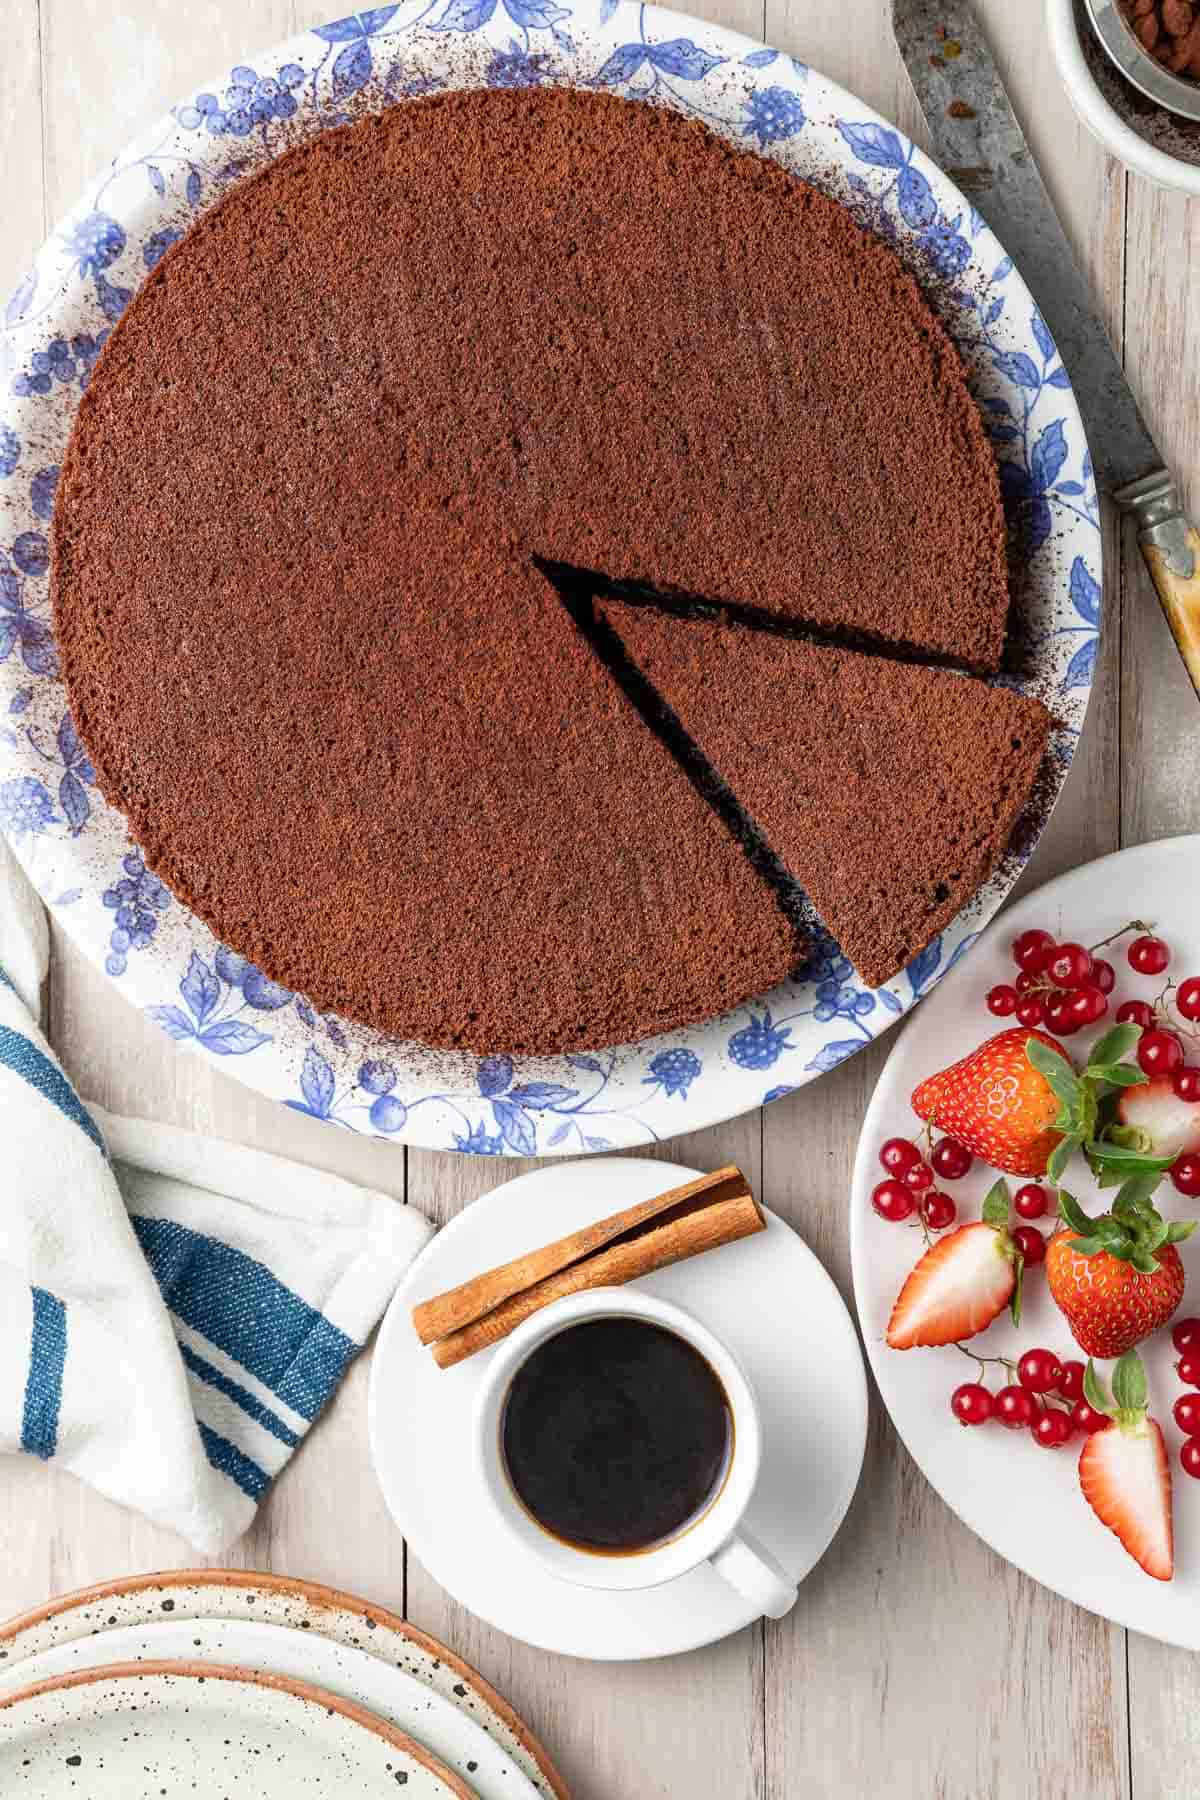 overhead shot of a chocolate olive oil cake on a plate next to a knife, cup of coffee with a cinnamon stick, and a plate of berries.